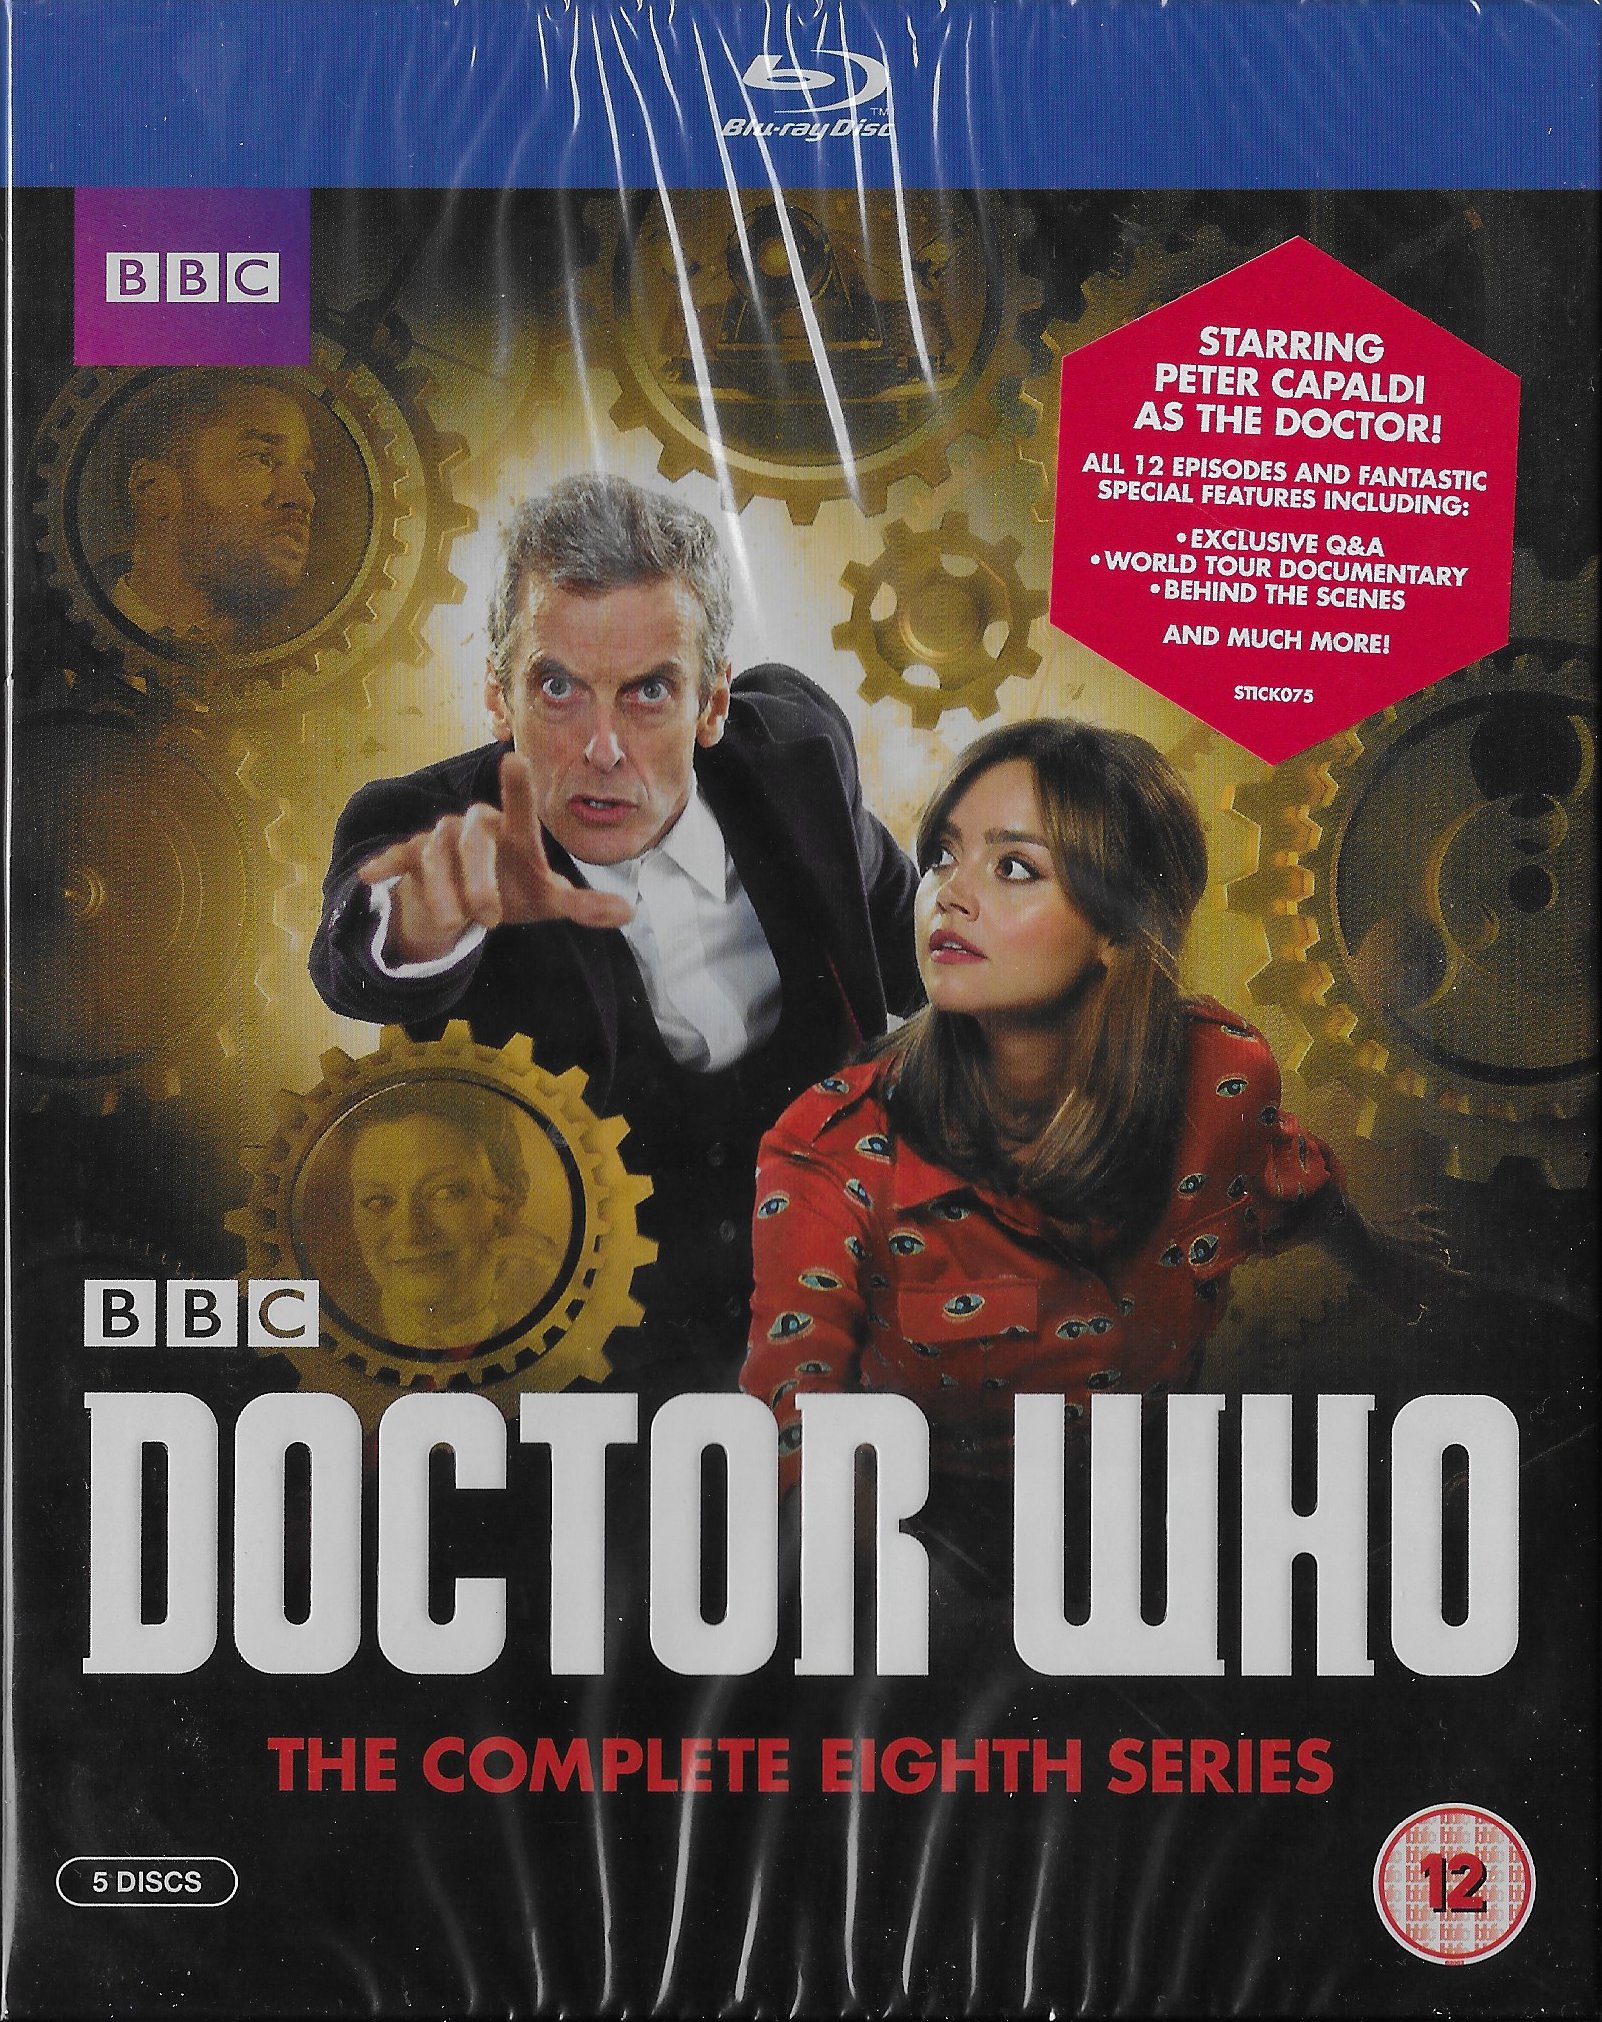 Picture of BBCBD 0272 Doctor Who - The complete series 8 by artist Various from the BBC blu-rays - Records and Tapes library